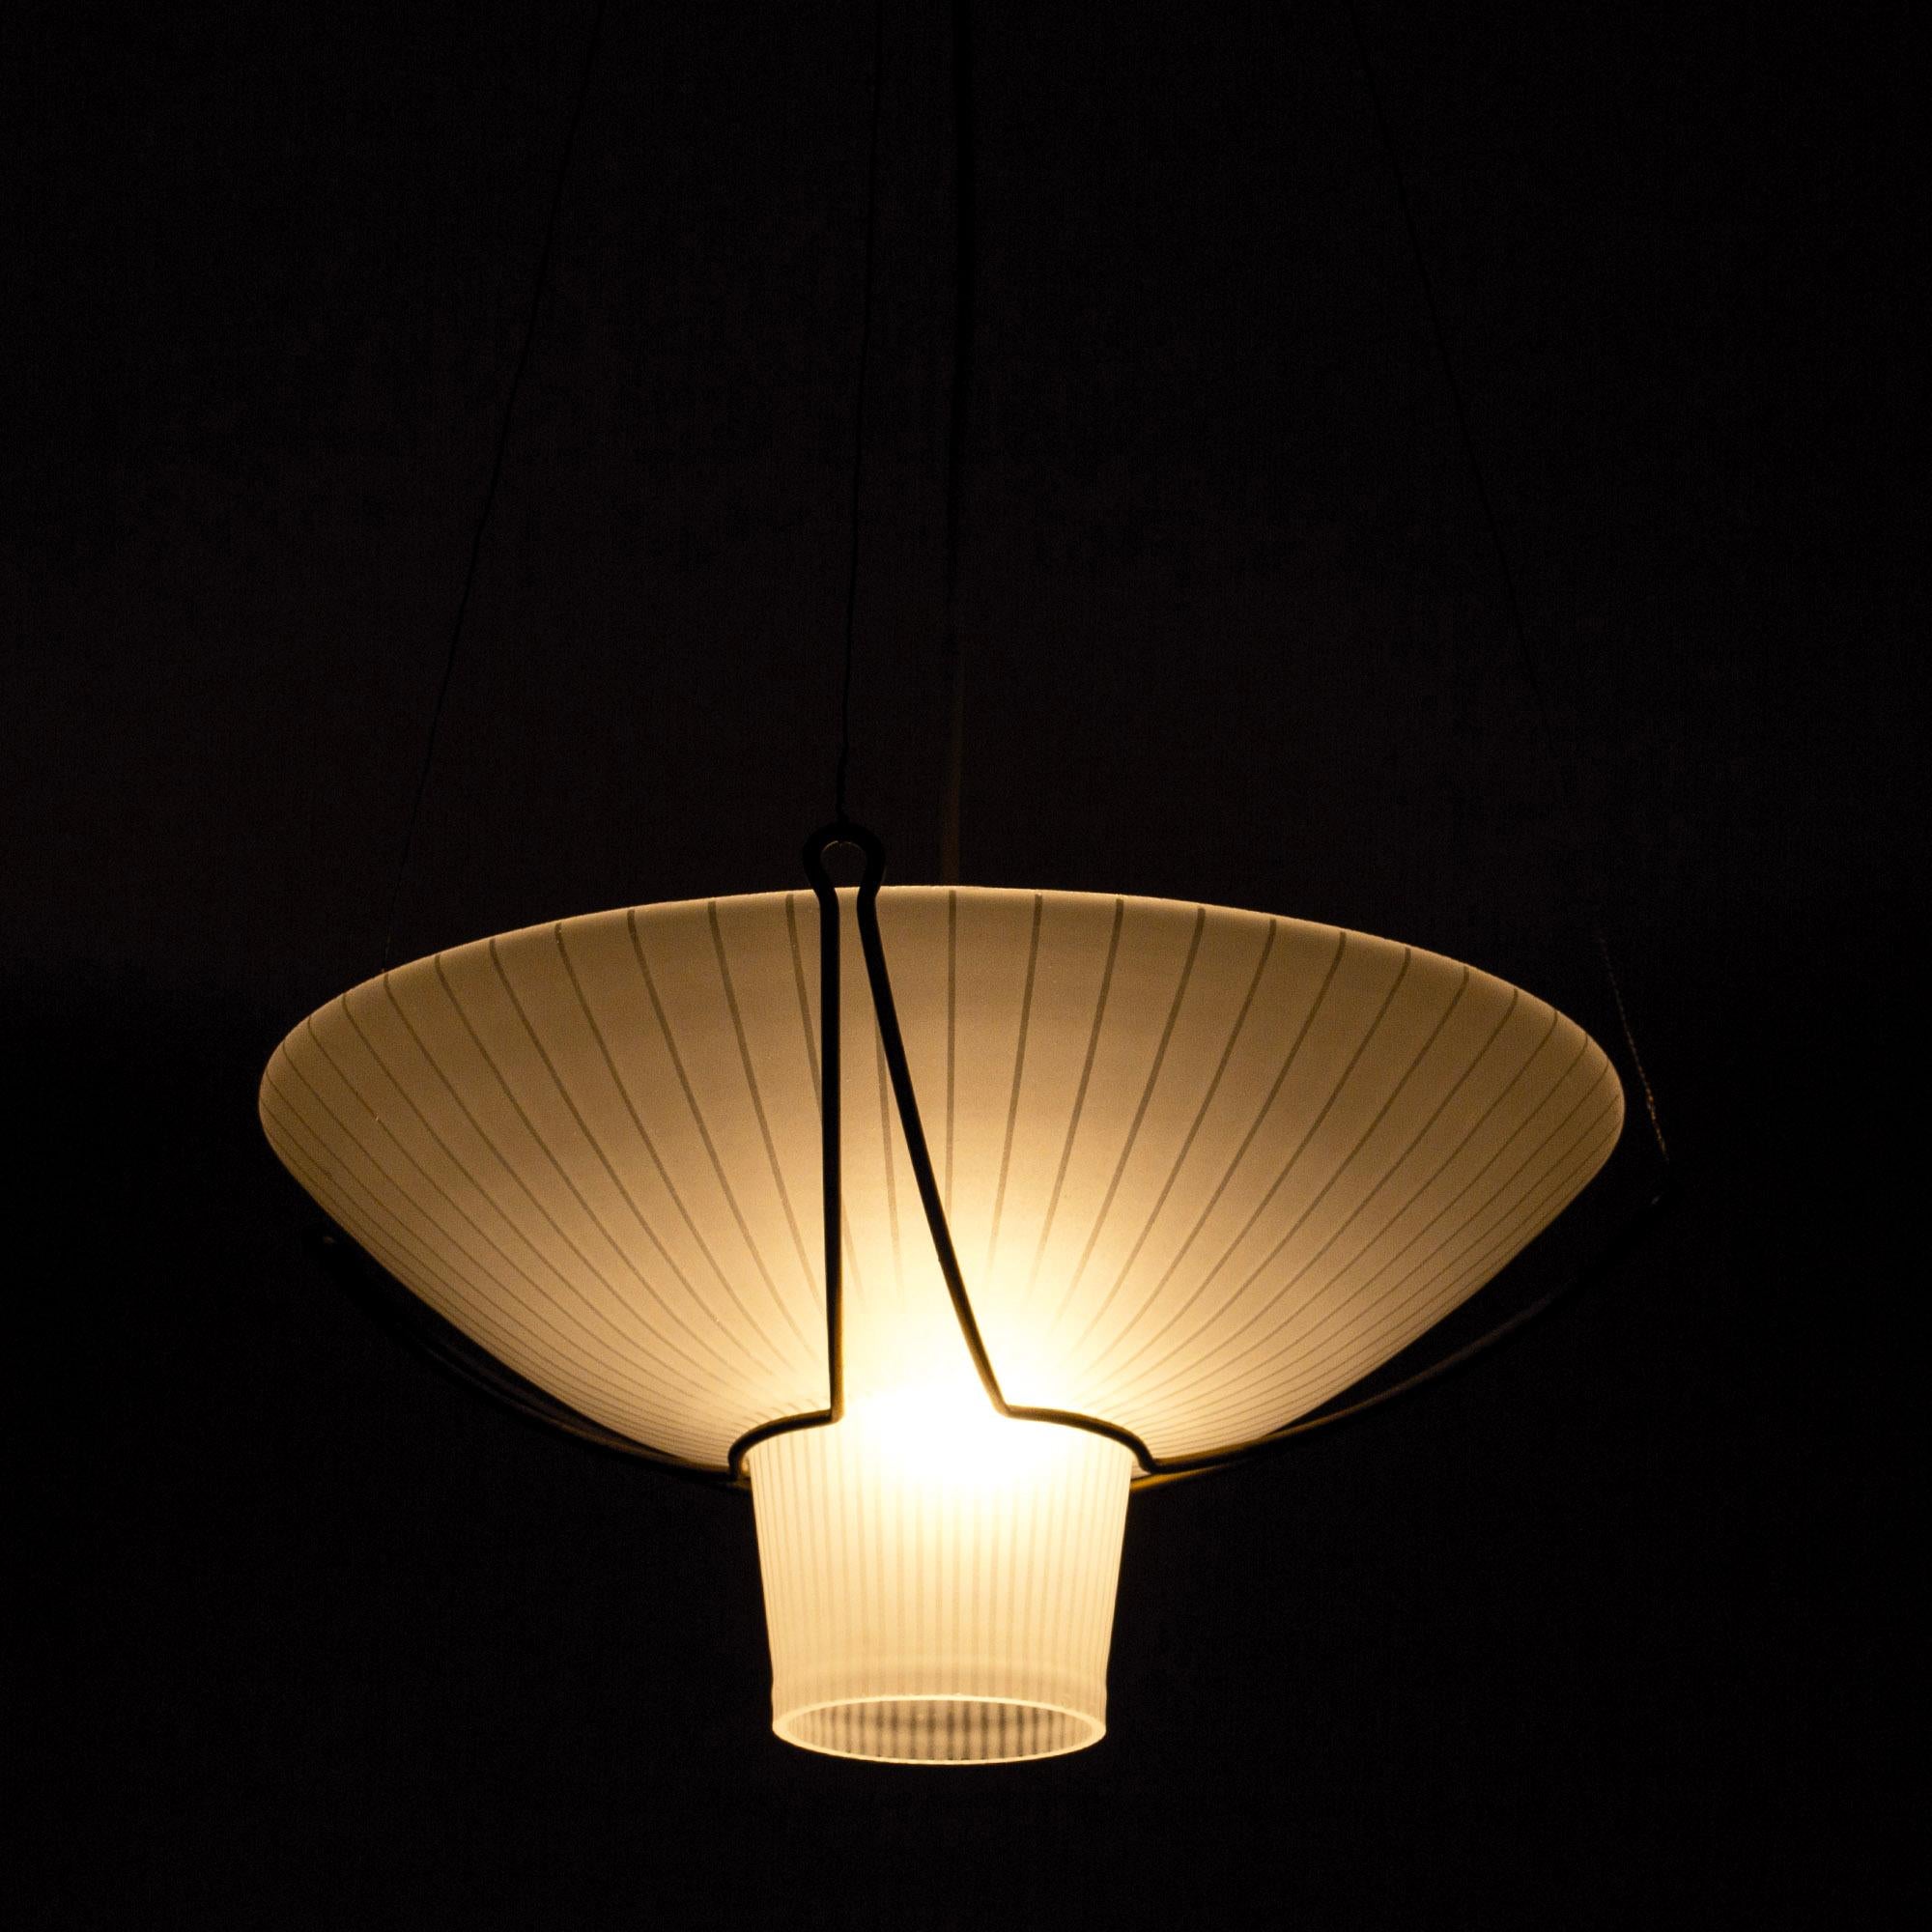 Elegant ceiling lamp by Hans Bergström, with a glass shade suspended in a cool brass frame. Looks great glowing in the dark.

Hans Bergström was the owner and creative director of the lighting firm Ateljé Lyktan, which he founded in Åhus in the